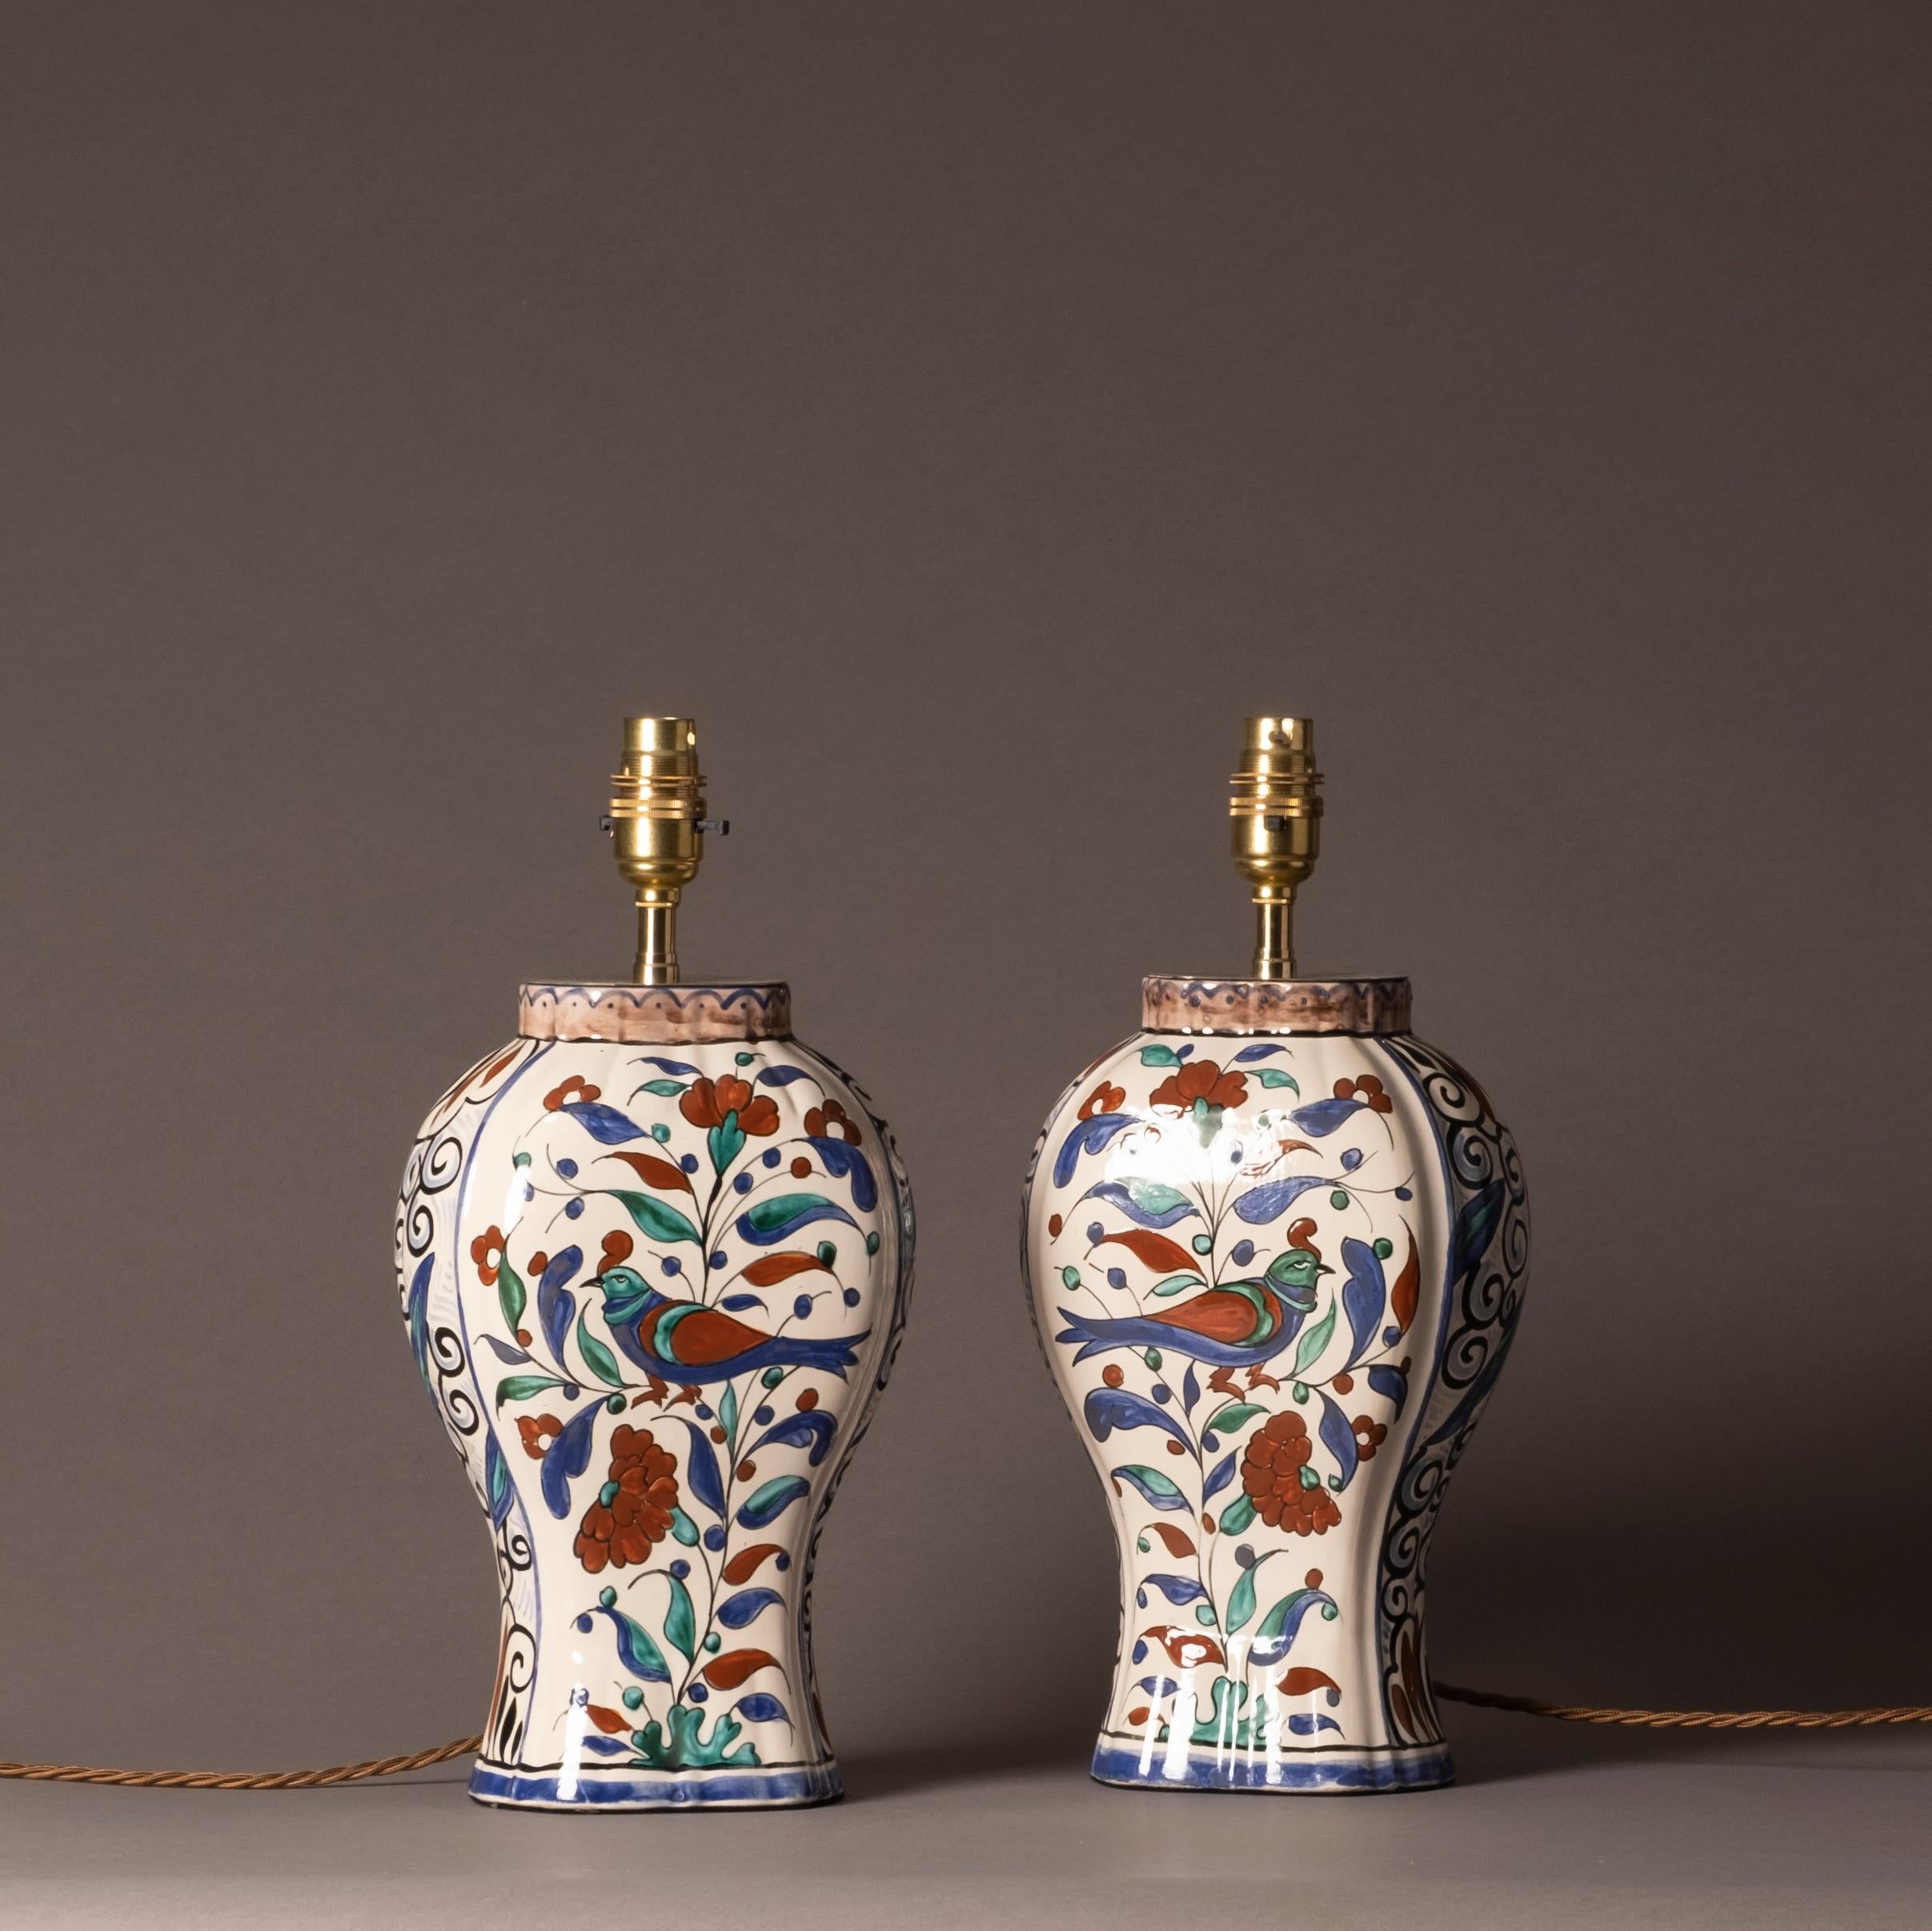 A pair of early 20th century faience pottery vases, of baluster form, the bodies decorated with birds, foliage and scrollwork in red, green, blue and black glazes upon a white ground. Now mounted as a pair of table lamps.

Height dimensions refer